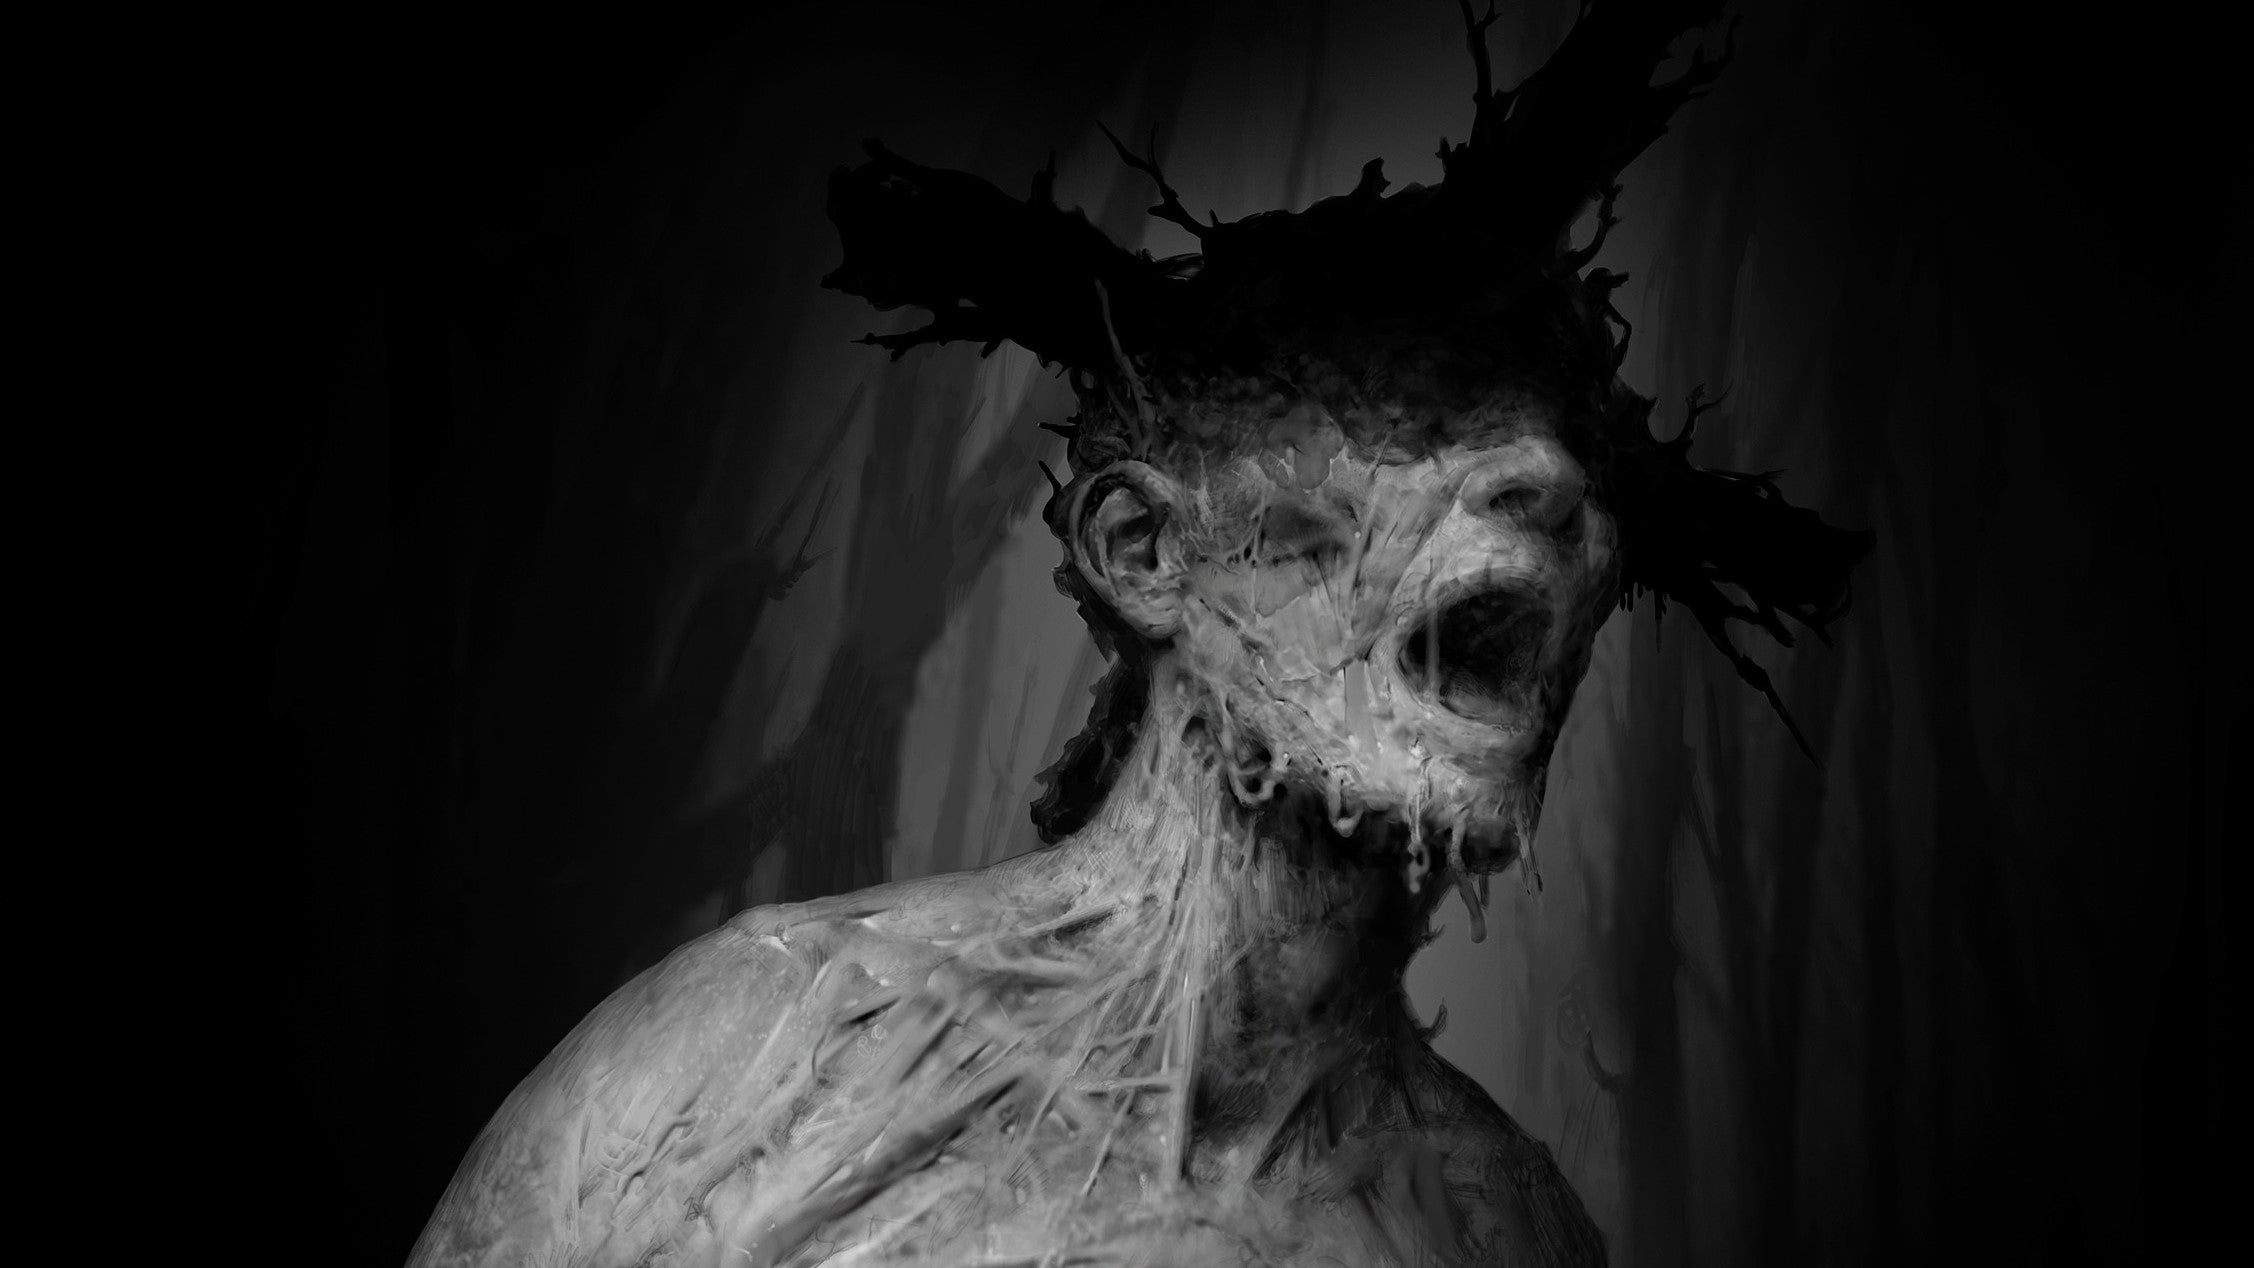 A greyscale image of a man in agony with something like a cross on his head. His skin appears to be melting. It's a distressing image. It's a horror game.